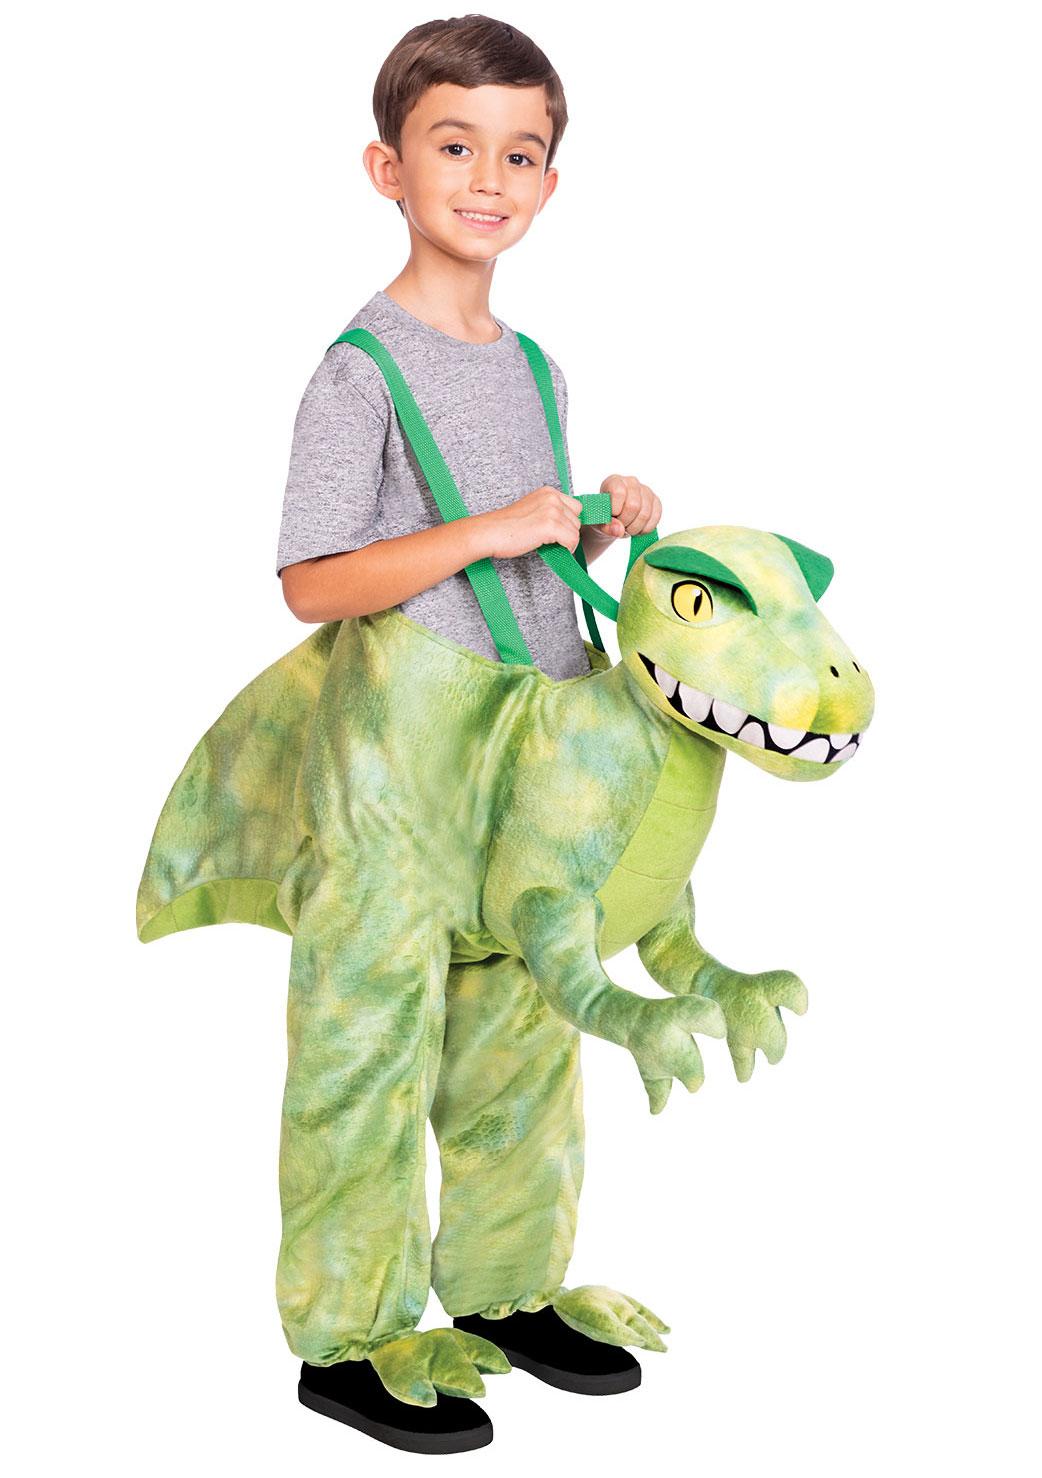 Children's Ride In Dinosaur Fancy Dress Costume by Amscan 9904518 available here at Karnival Costumes online party shop